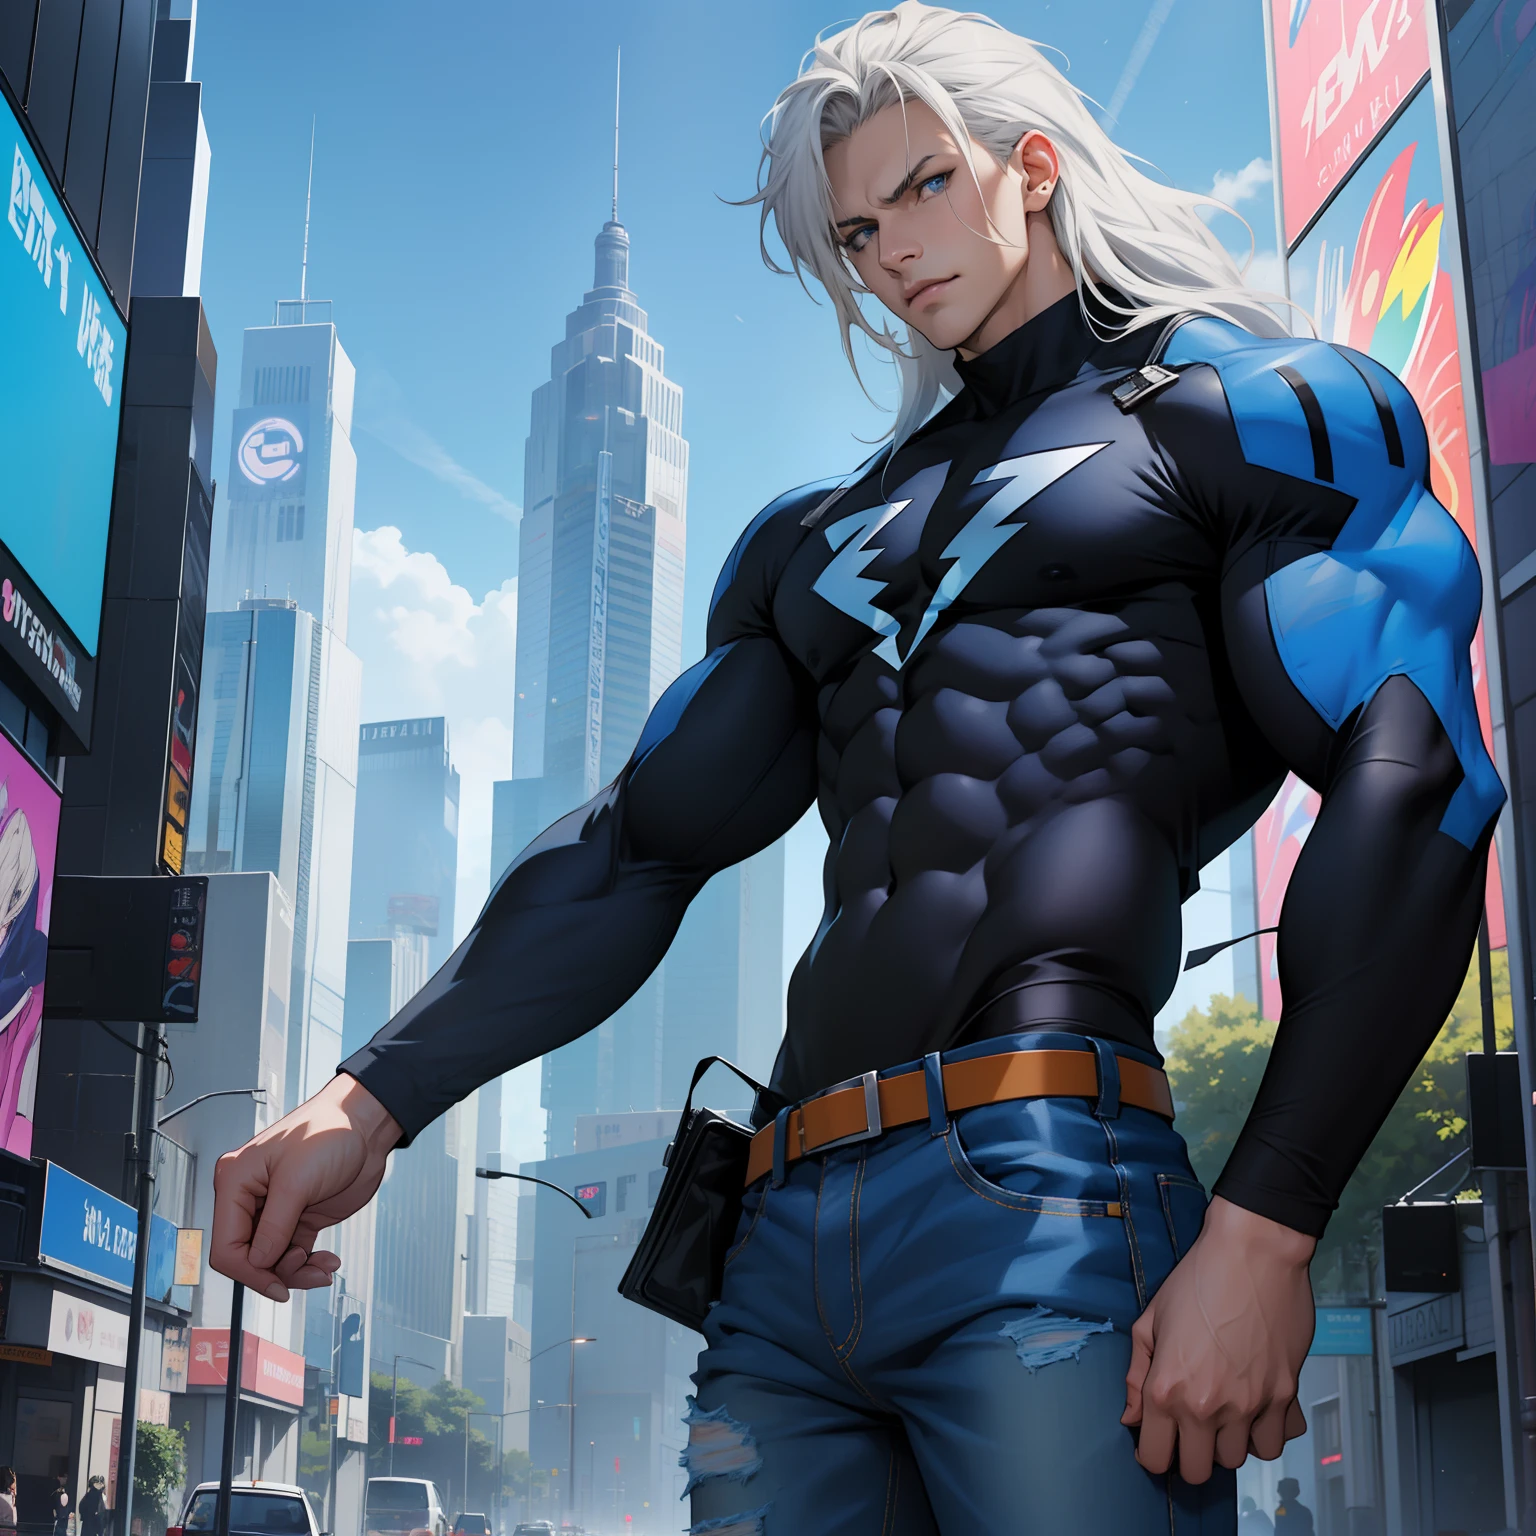 ((Anime style art)), Extremely muscular masculine character, tan skin, long rainbow hair,  sapphire blue eyes, bodybuilder body, wearing  cobalt and silver shirt with lightning bolt shaped holed cutout ((chest window)) futuristic crystal  tower cityscape, Busy route, Buildings, person open denim shirt, jeans,
AS & Vehicles. Main character from the anime, superhero, Nice image, Hard drive, 4k, Main character